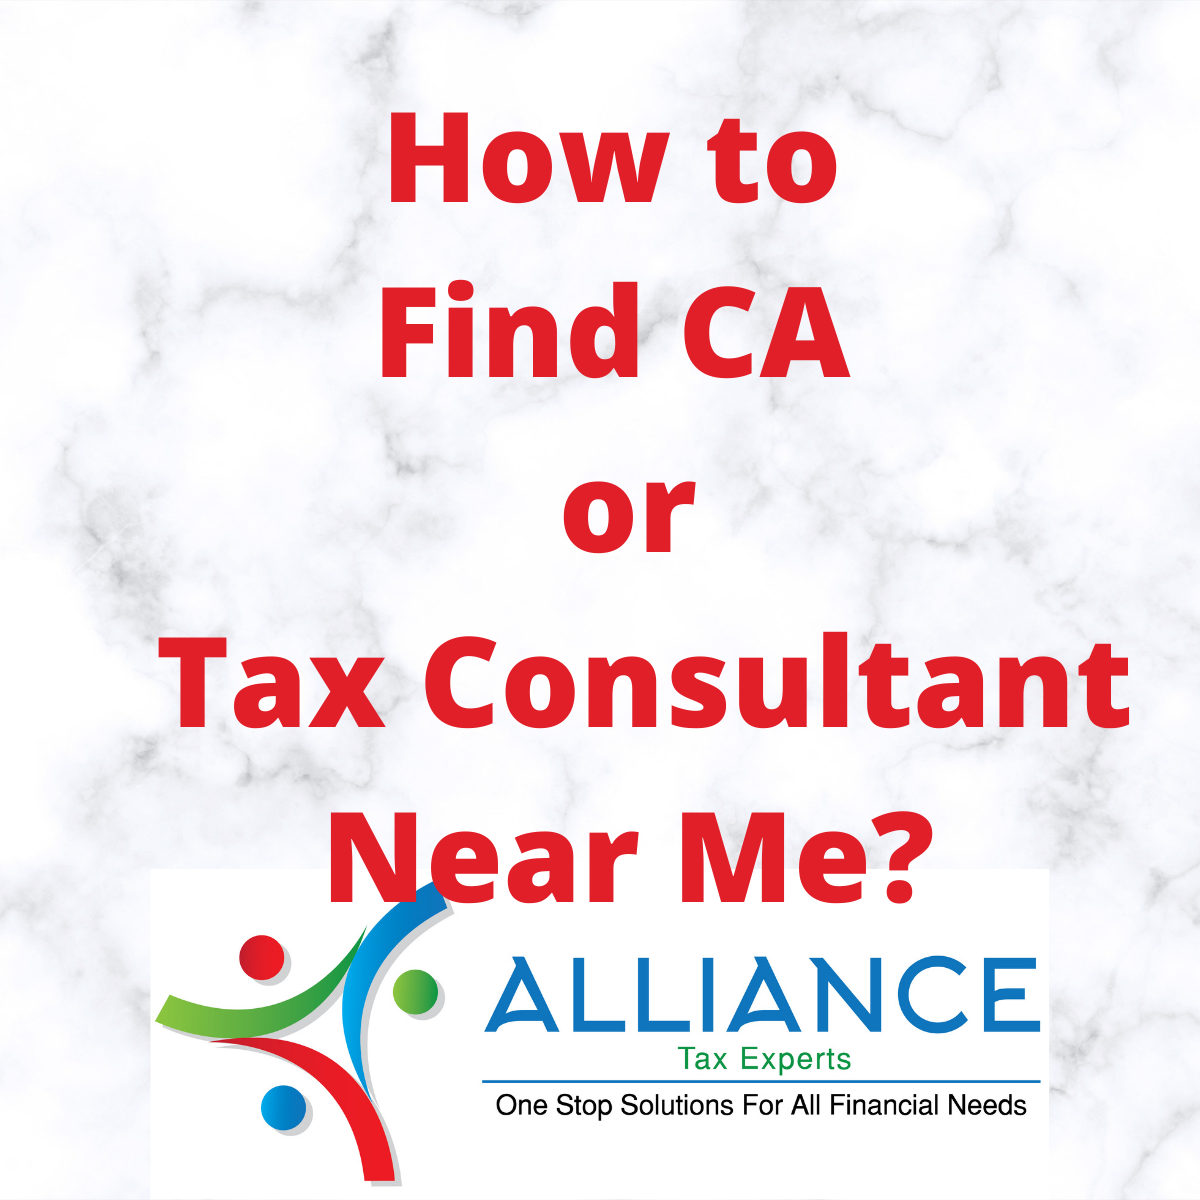 alliance-tax-experts-how-to-find-ca-or-tax-consultant-near-me-for